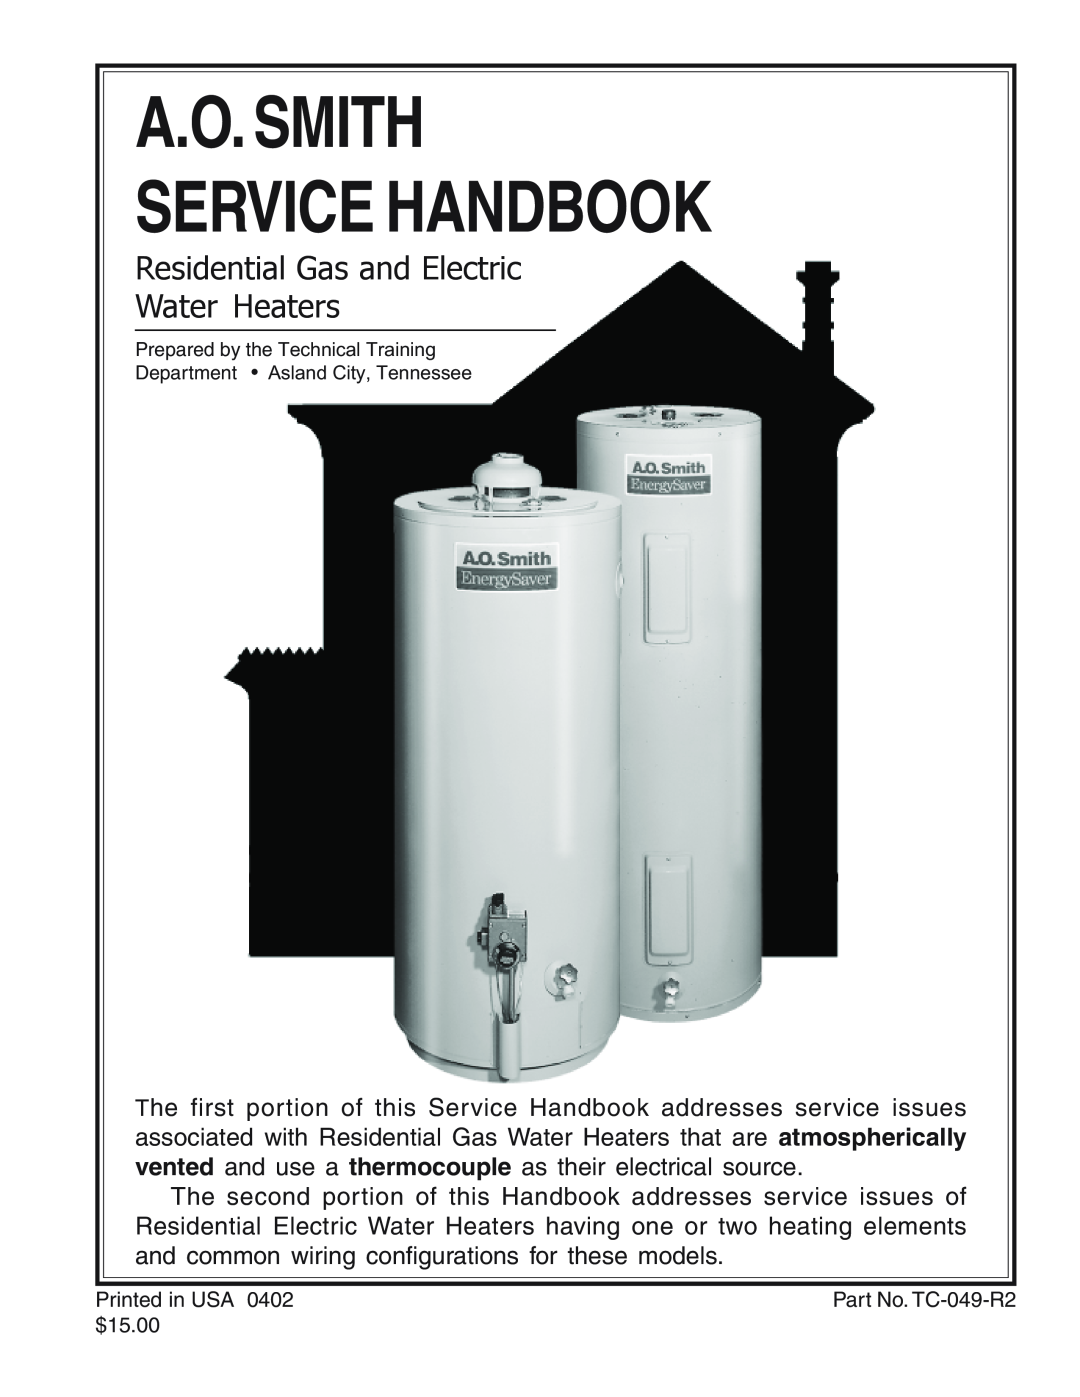 A.O. Smith TC-049-R2 manual A.O.Smith Service Handbook, Residential Gas and Electric Water Heaters 